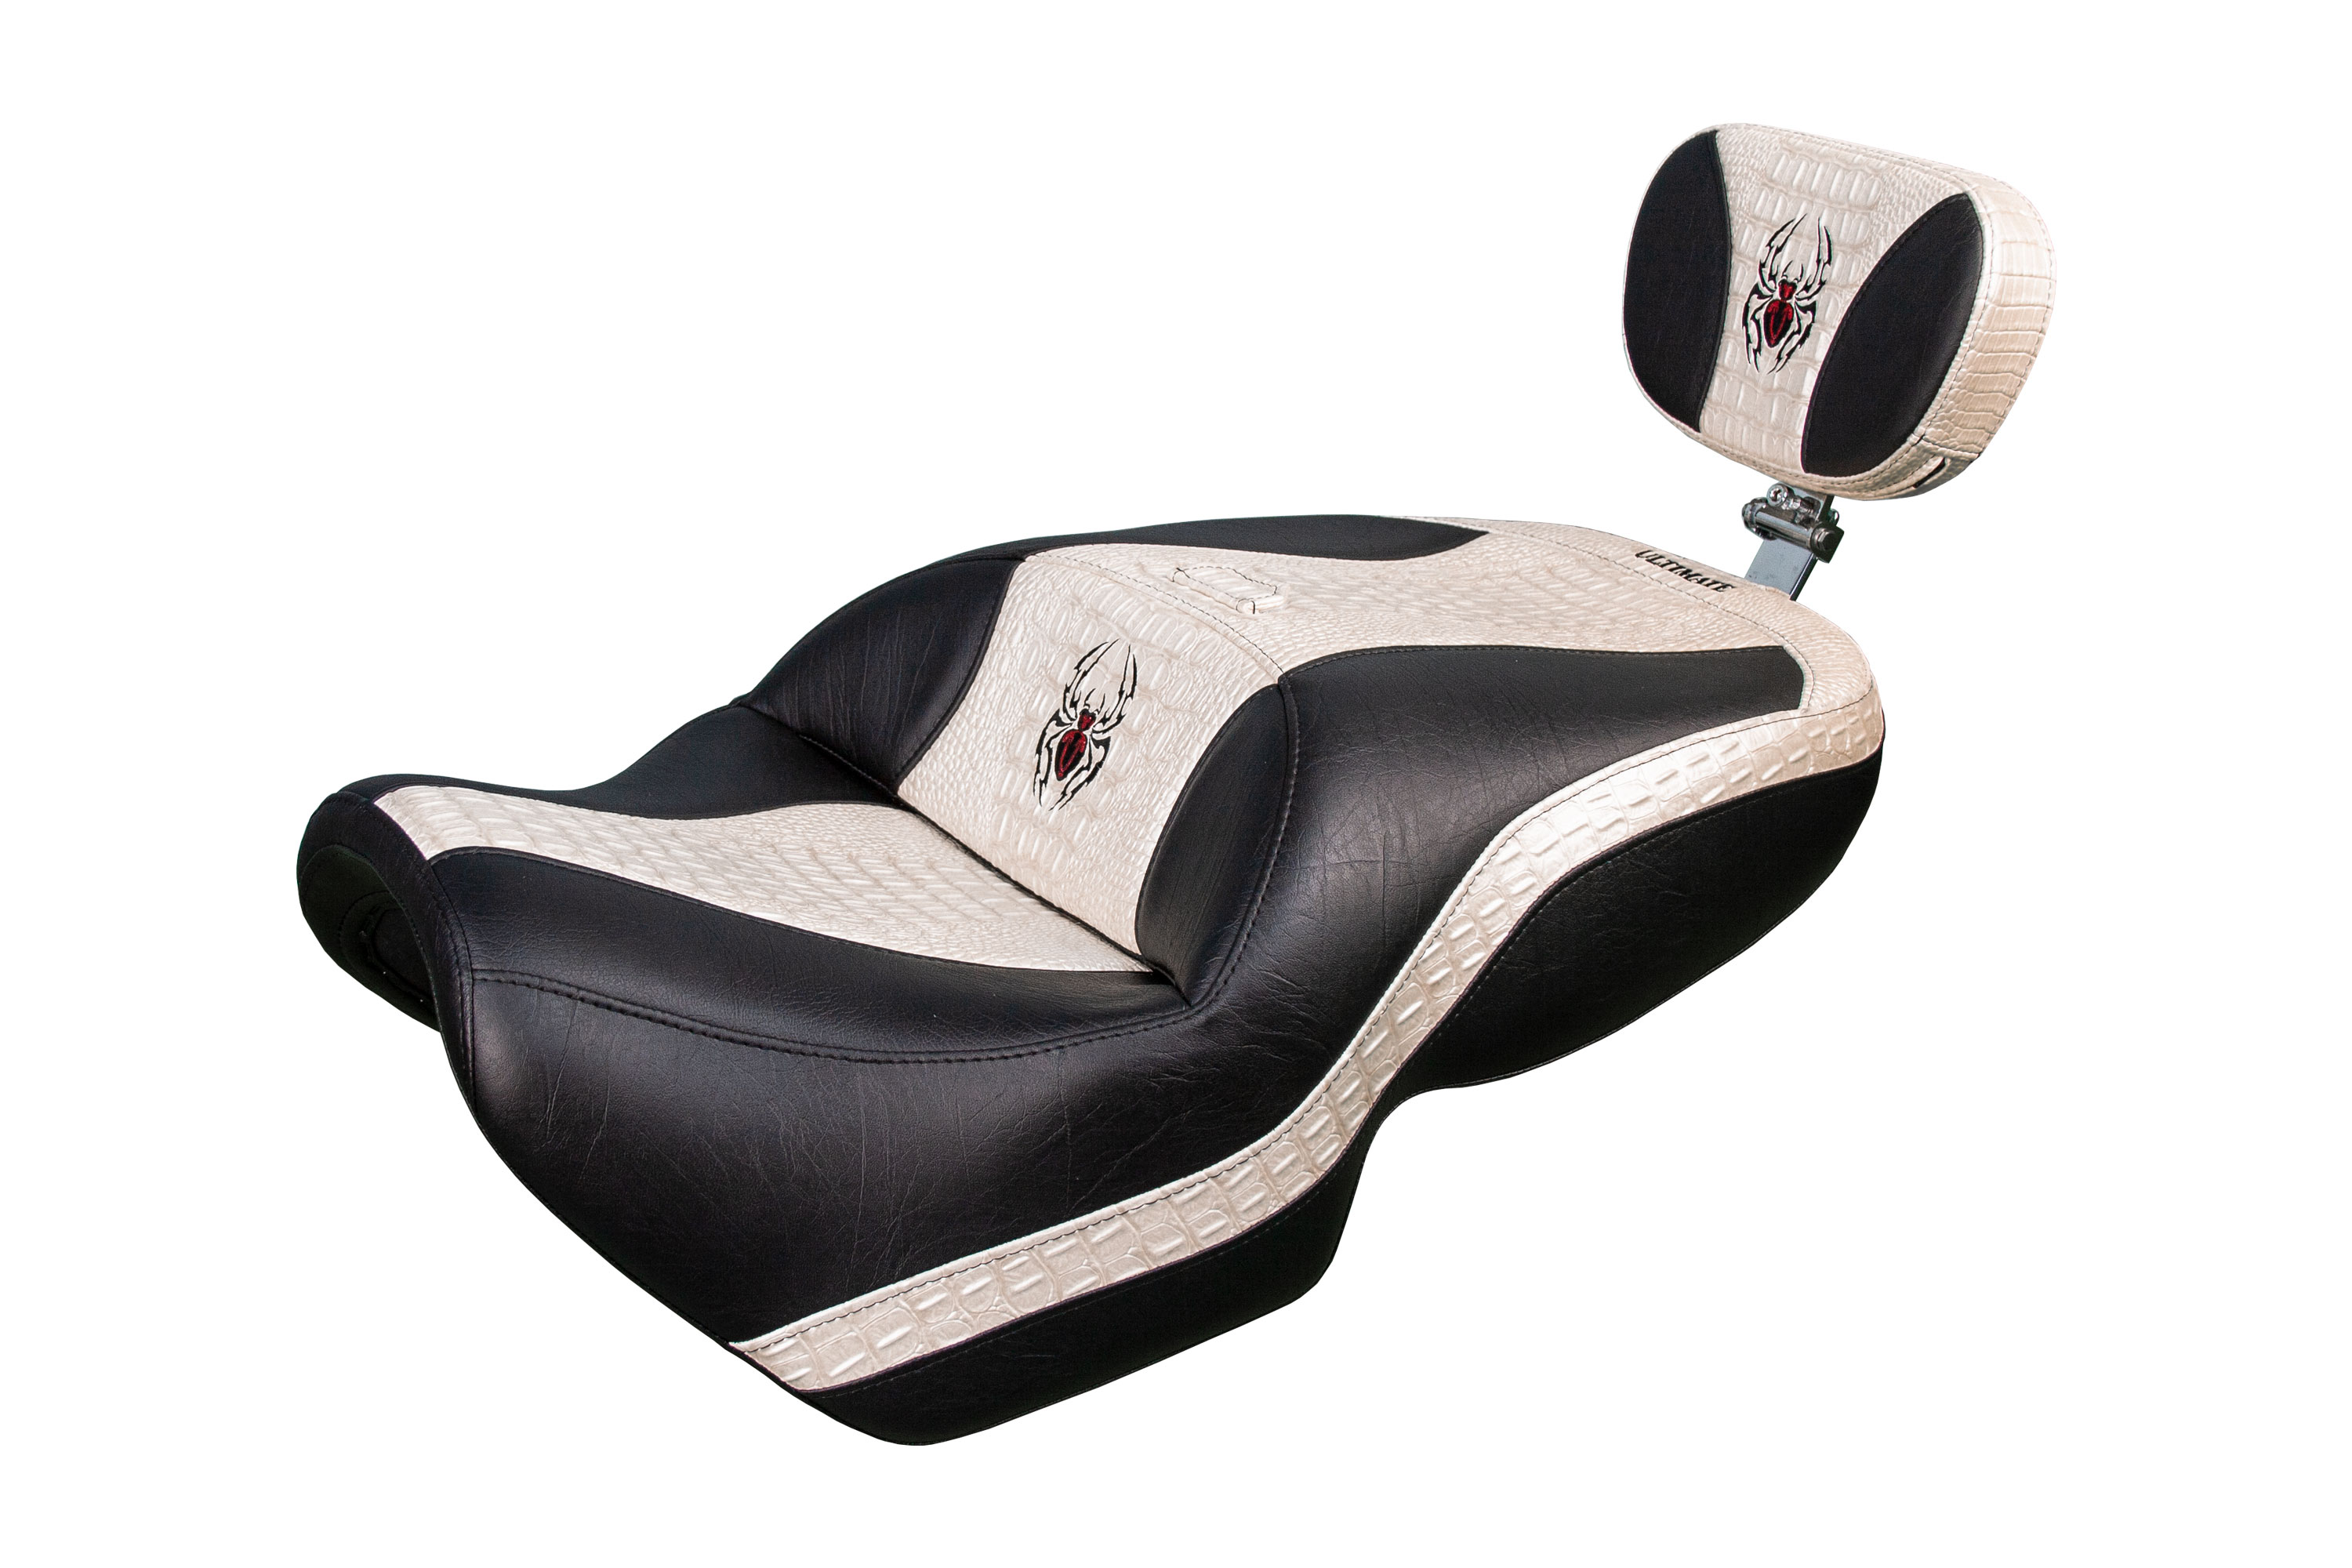 Spyder F3 Seat - Pearl White Croc Inlays and Logos (2020 and Newer)